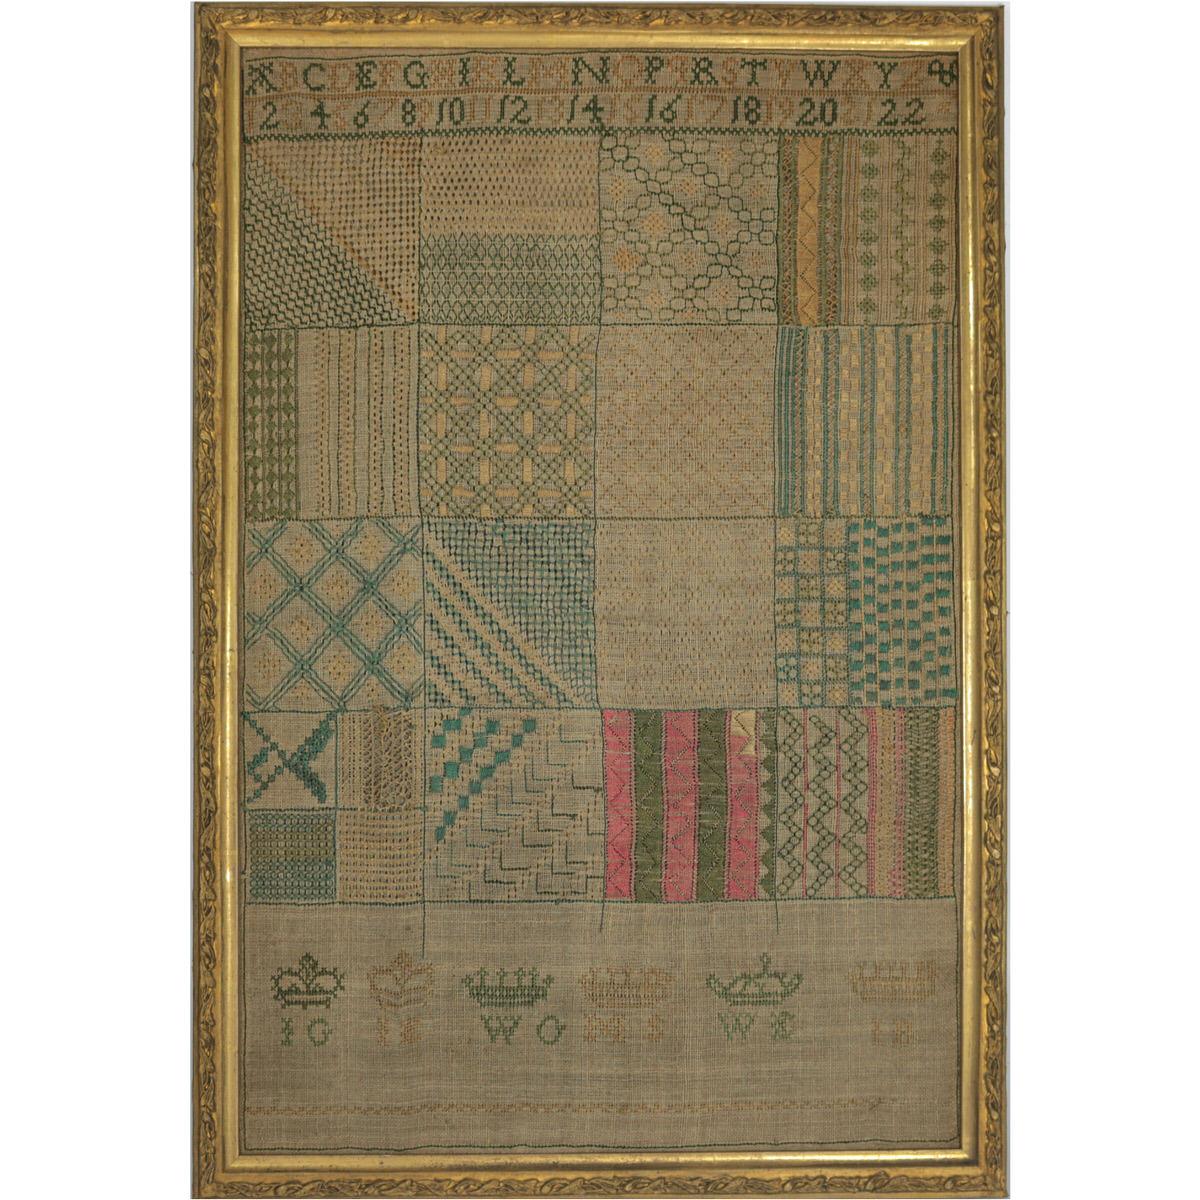 Darning Sampler, circa 1797. The sampler is worked in silk on linen ground, in a variety of stitches. Colours green, pink and gold. Alphabets A-Z in upper case and numbers 1-22. No signature or date. A wonderful set of darning panels, finely